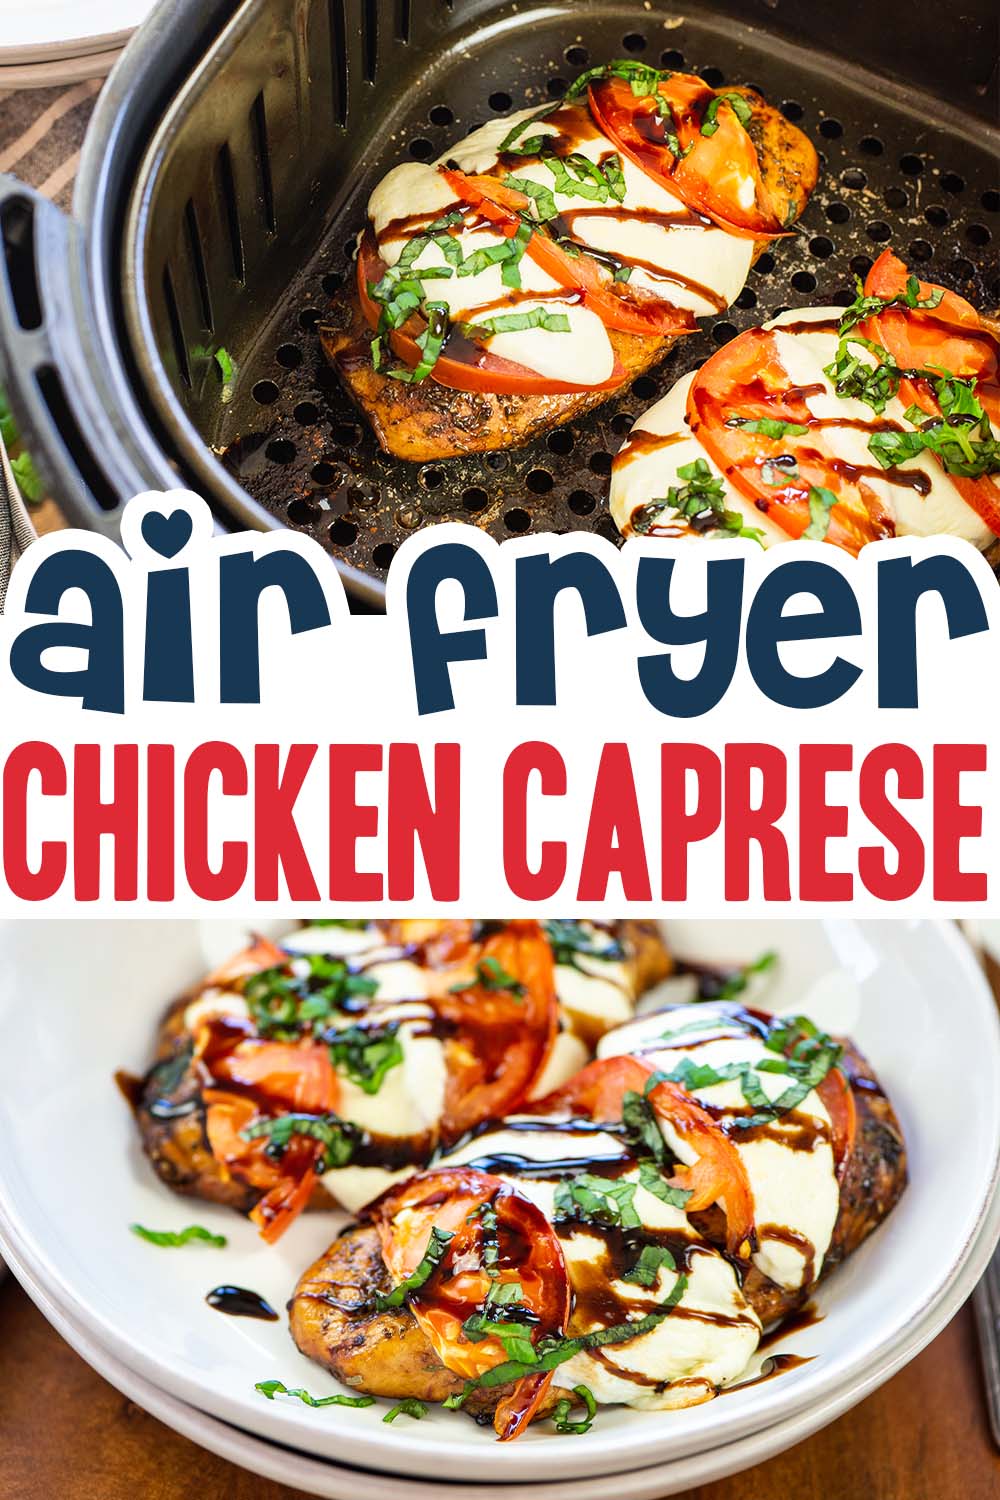 This perfectly cooked chicken caprese recipe uses the air fryer to make it easy as possible!